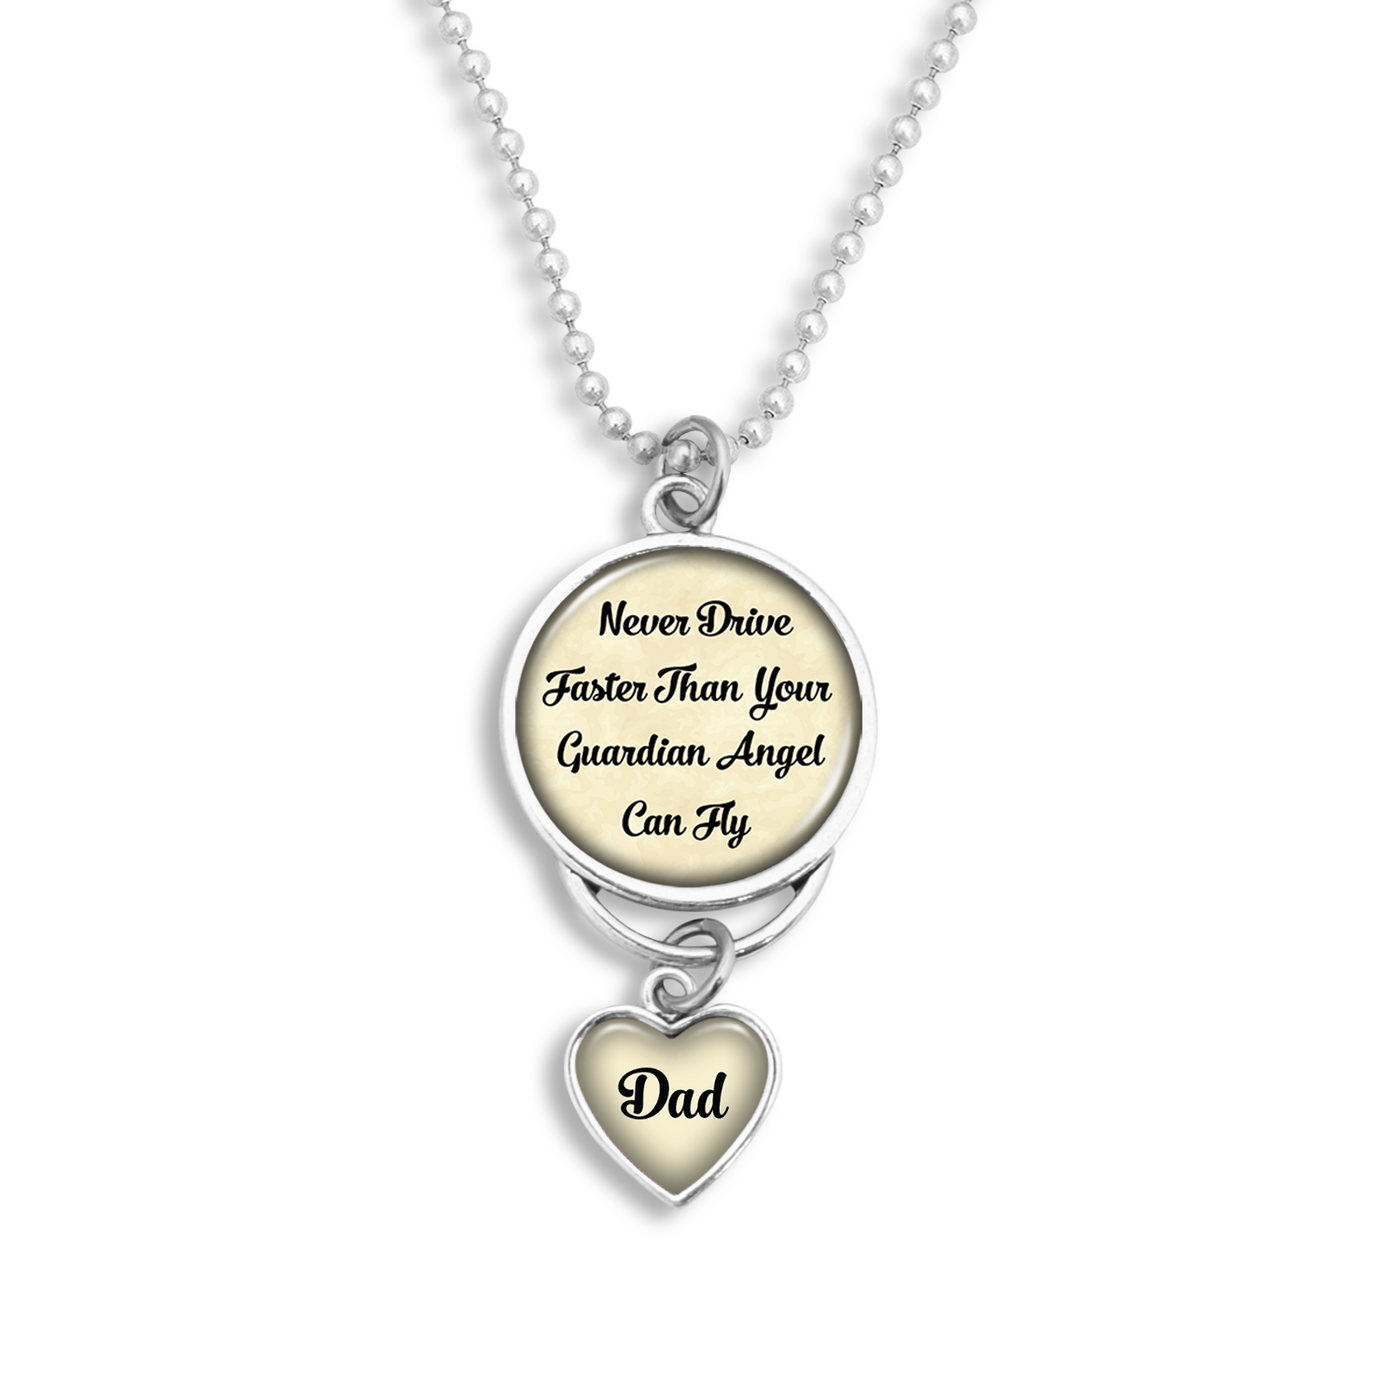 Dad Never Drive Faster Than Your Guardian Angel Can Fly Rearview Mirror Charm